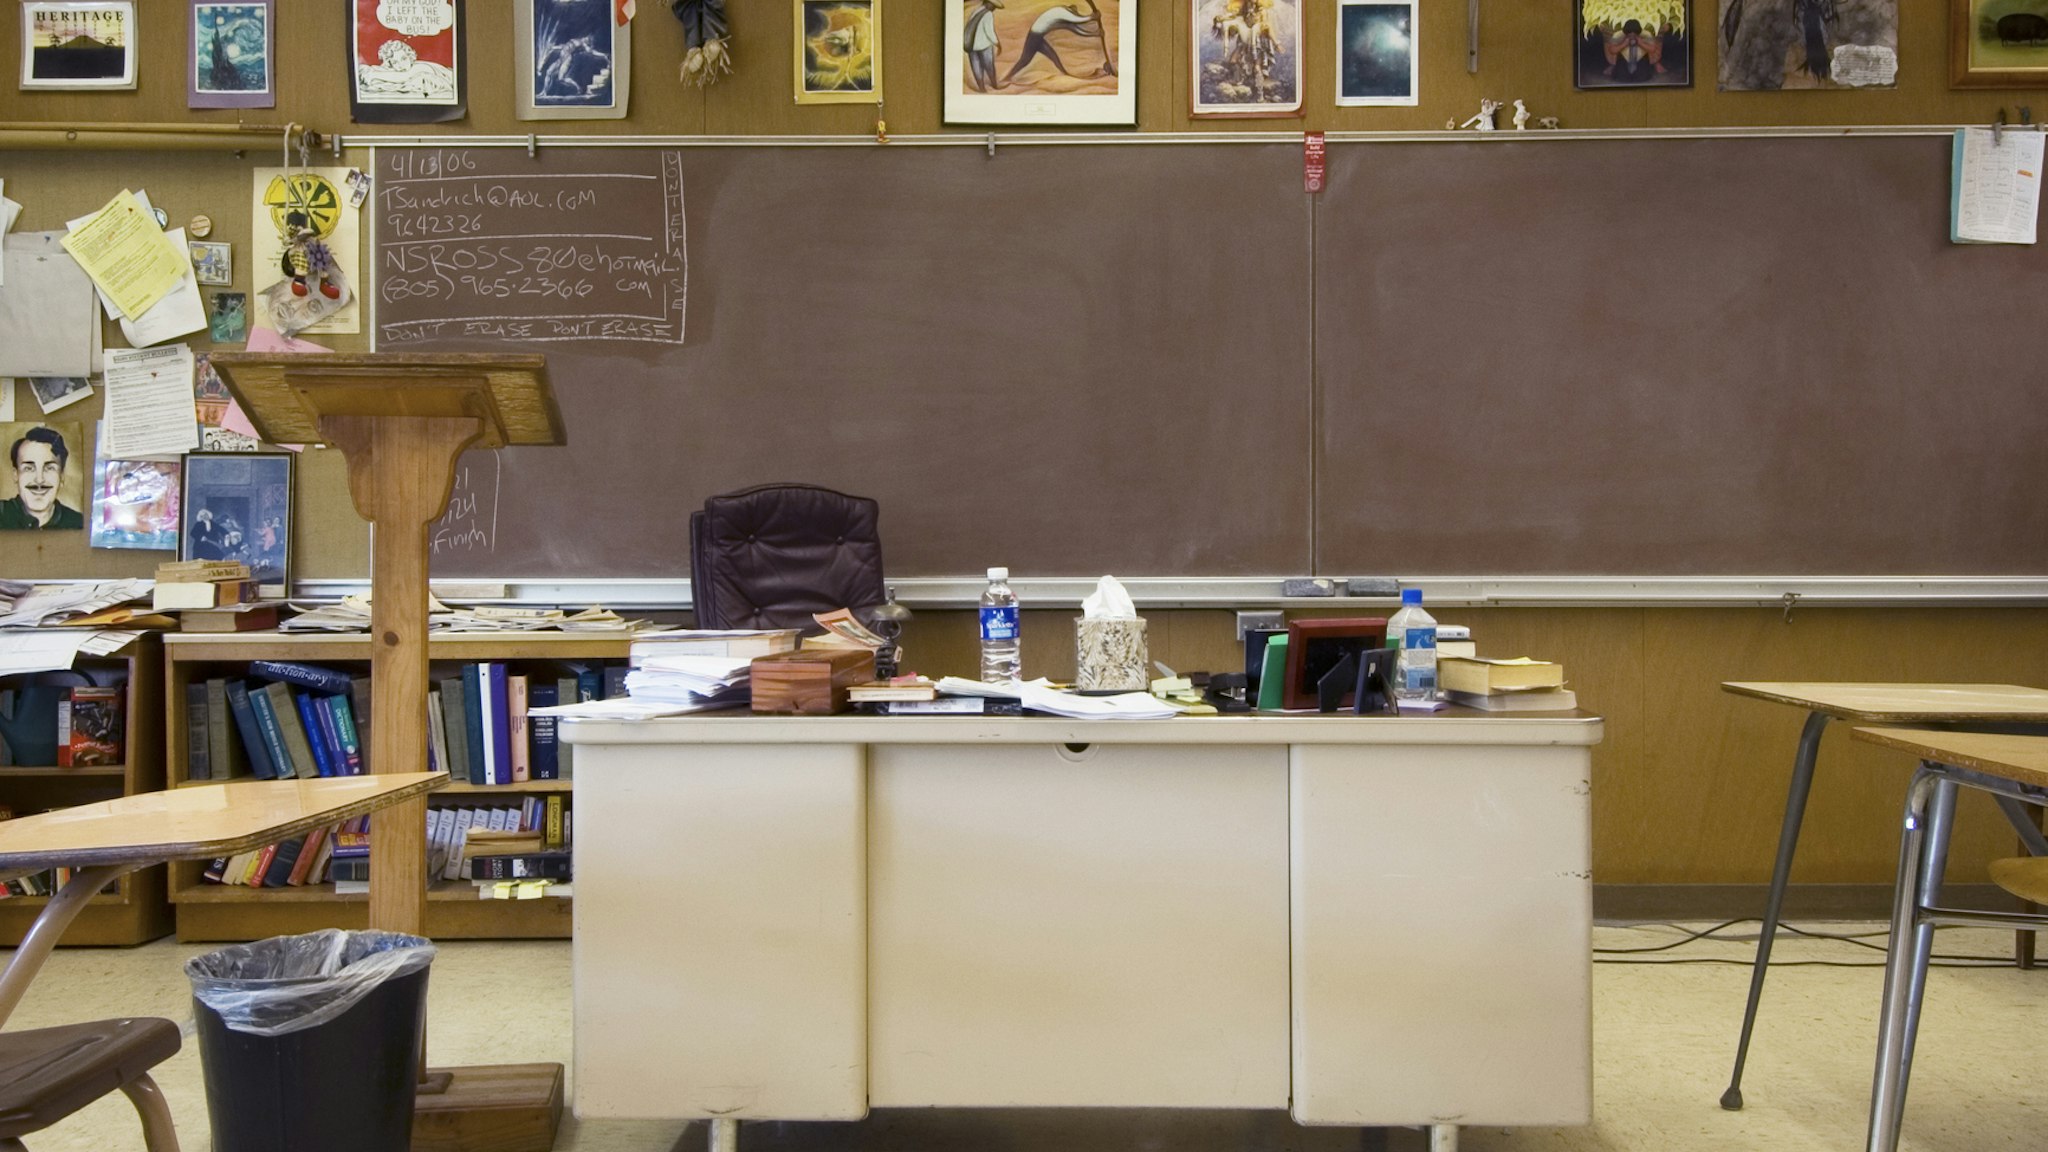 Classroom with teacher's desk in middle of room - stock photo